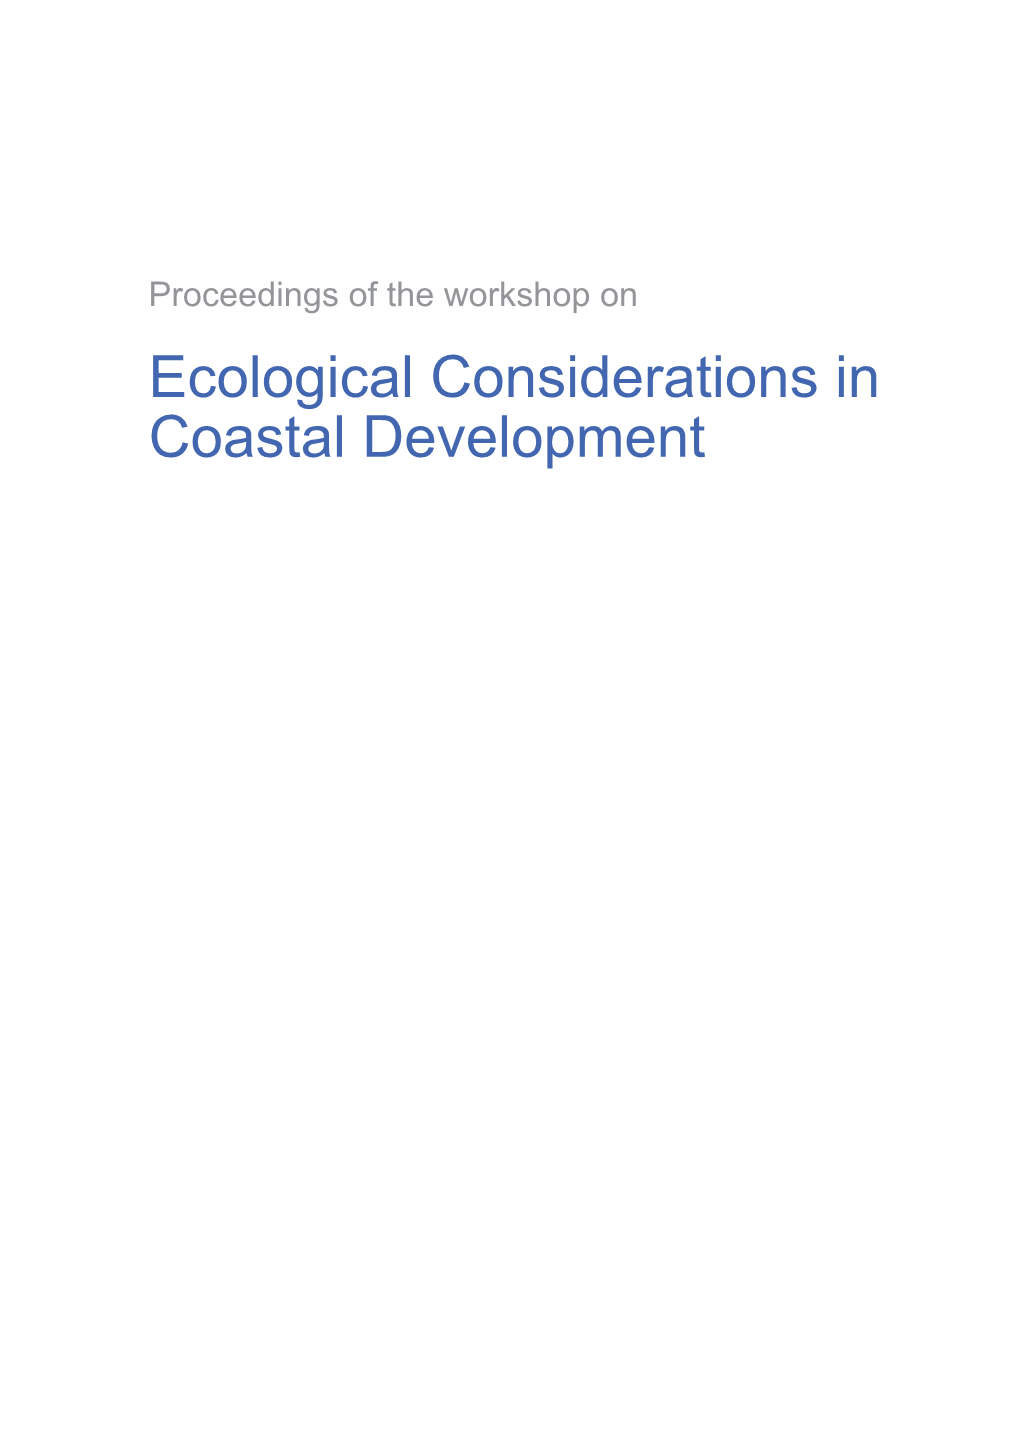 Ecological Considerations in Coastal Development Proceedings of the Workshop on Ecological Considerations in Coastal Development